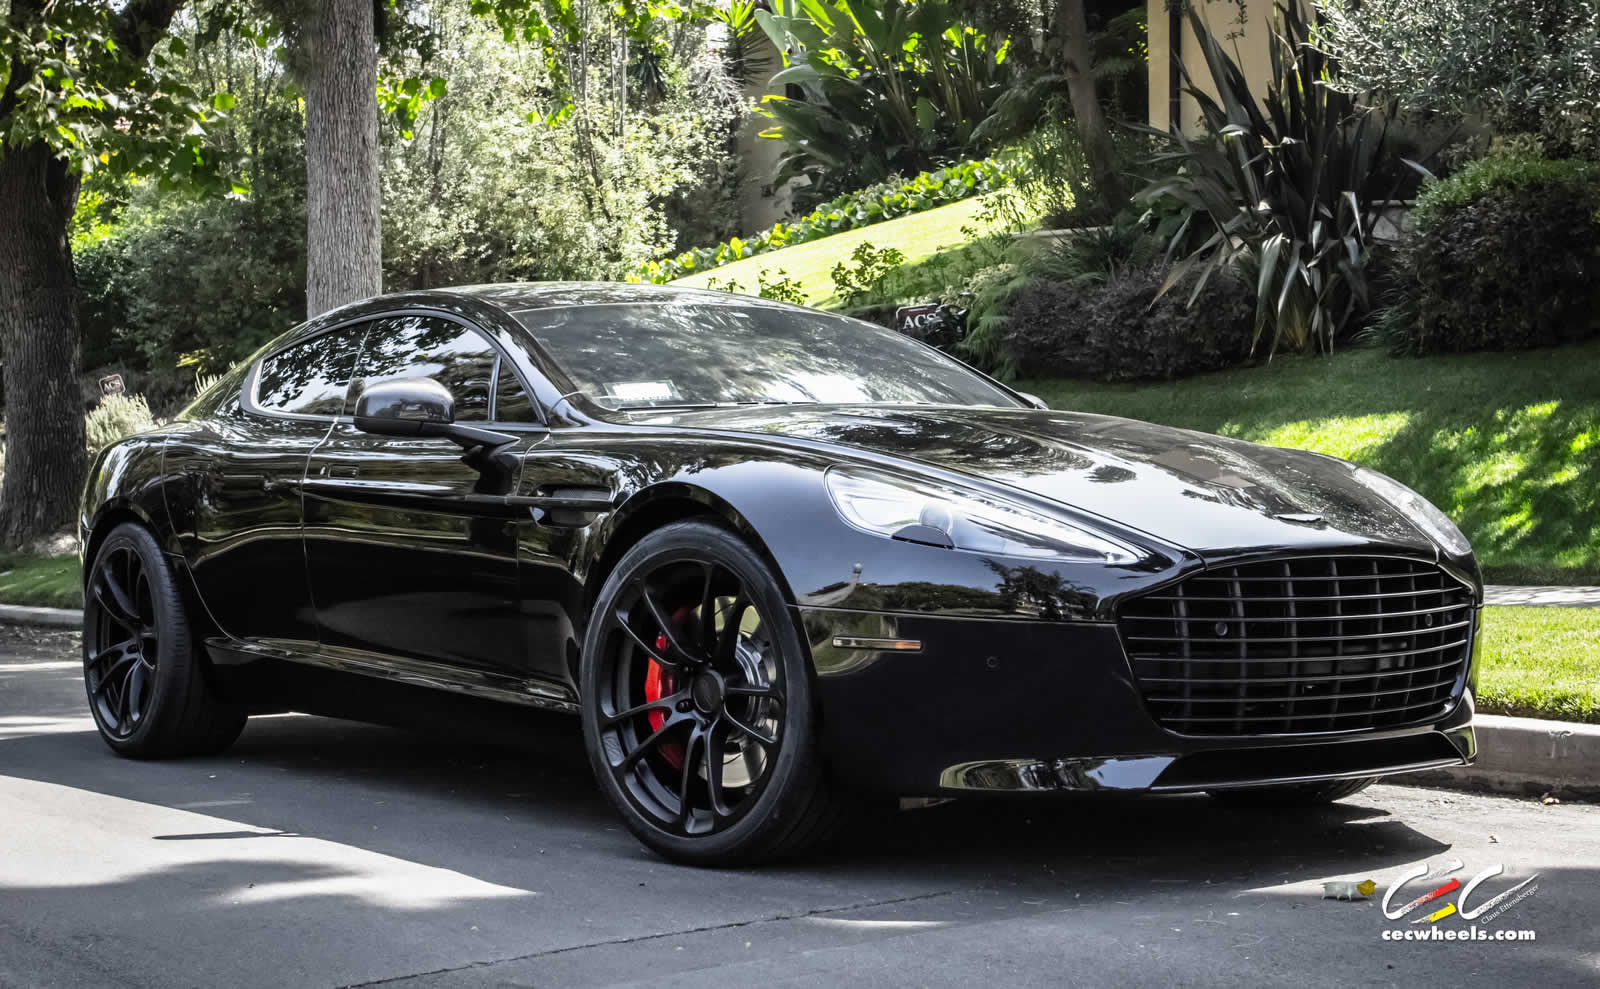 Nice Images Collection: Aston Martin Rapide Desktop Wallpapers